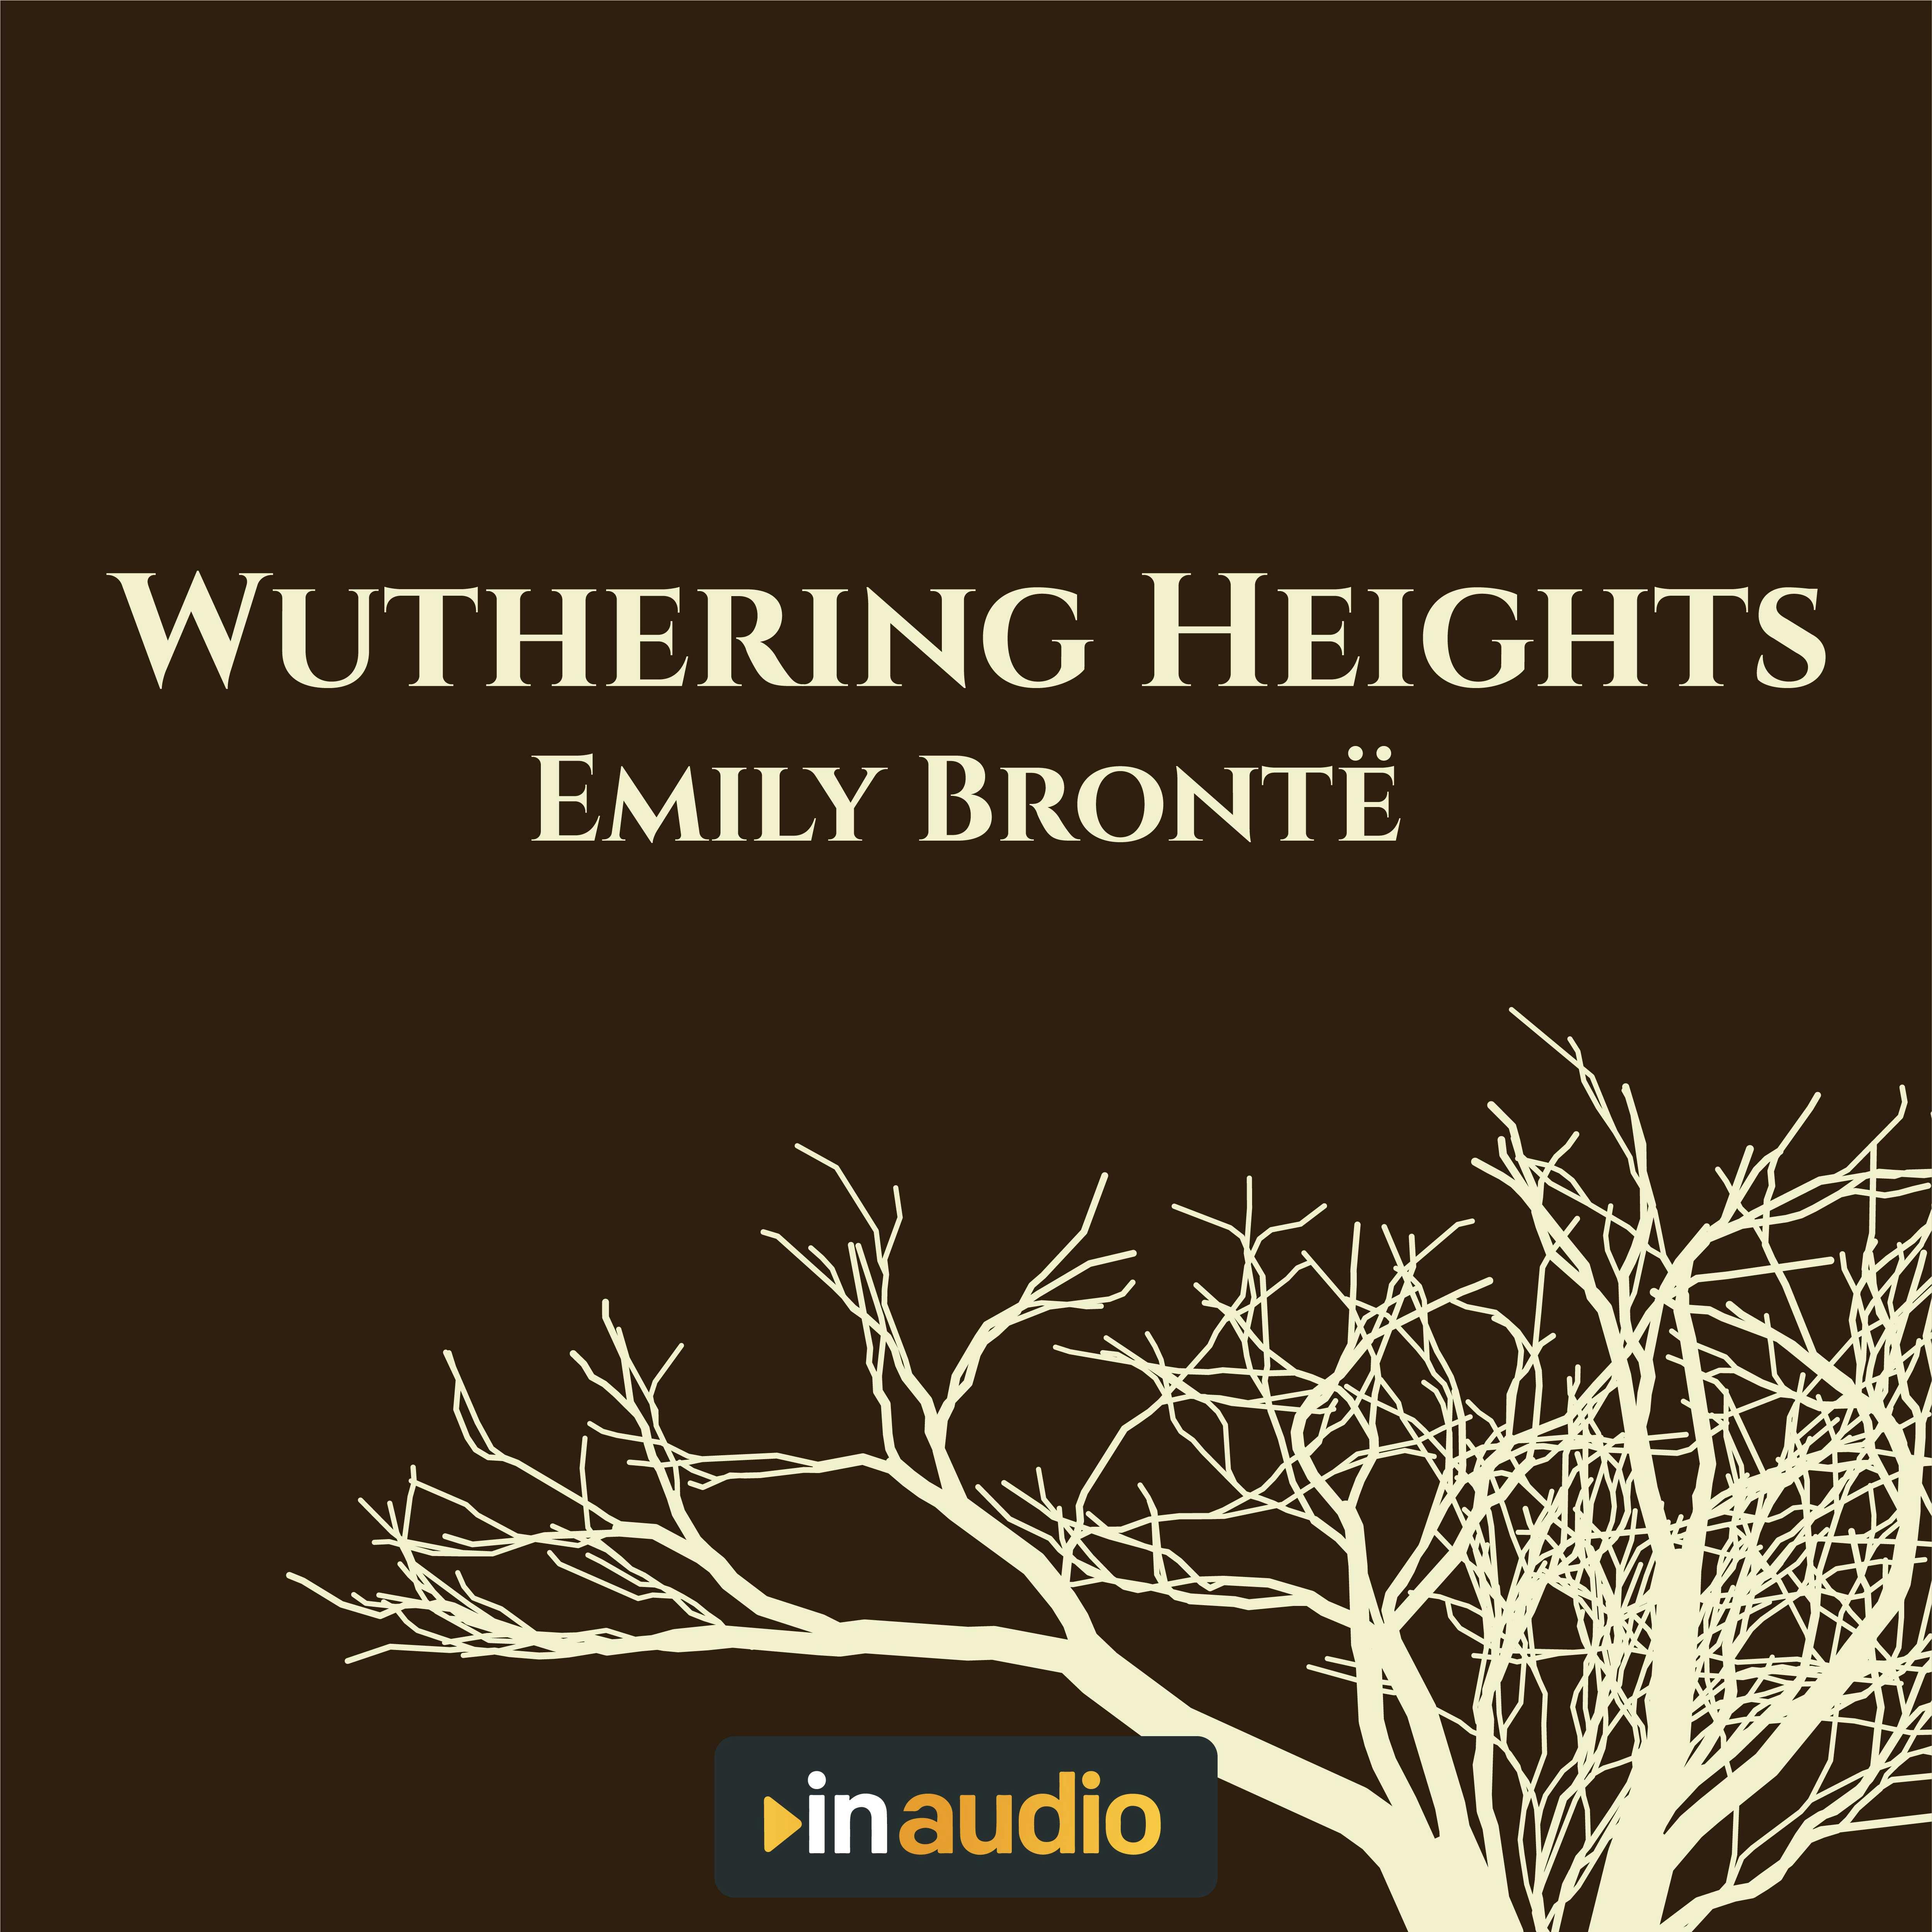 Wuthering Heights, Audiobook & E-book, Emily Brontë